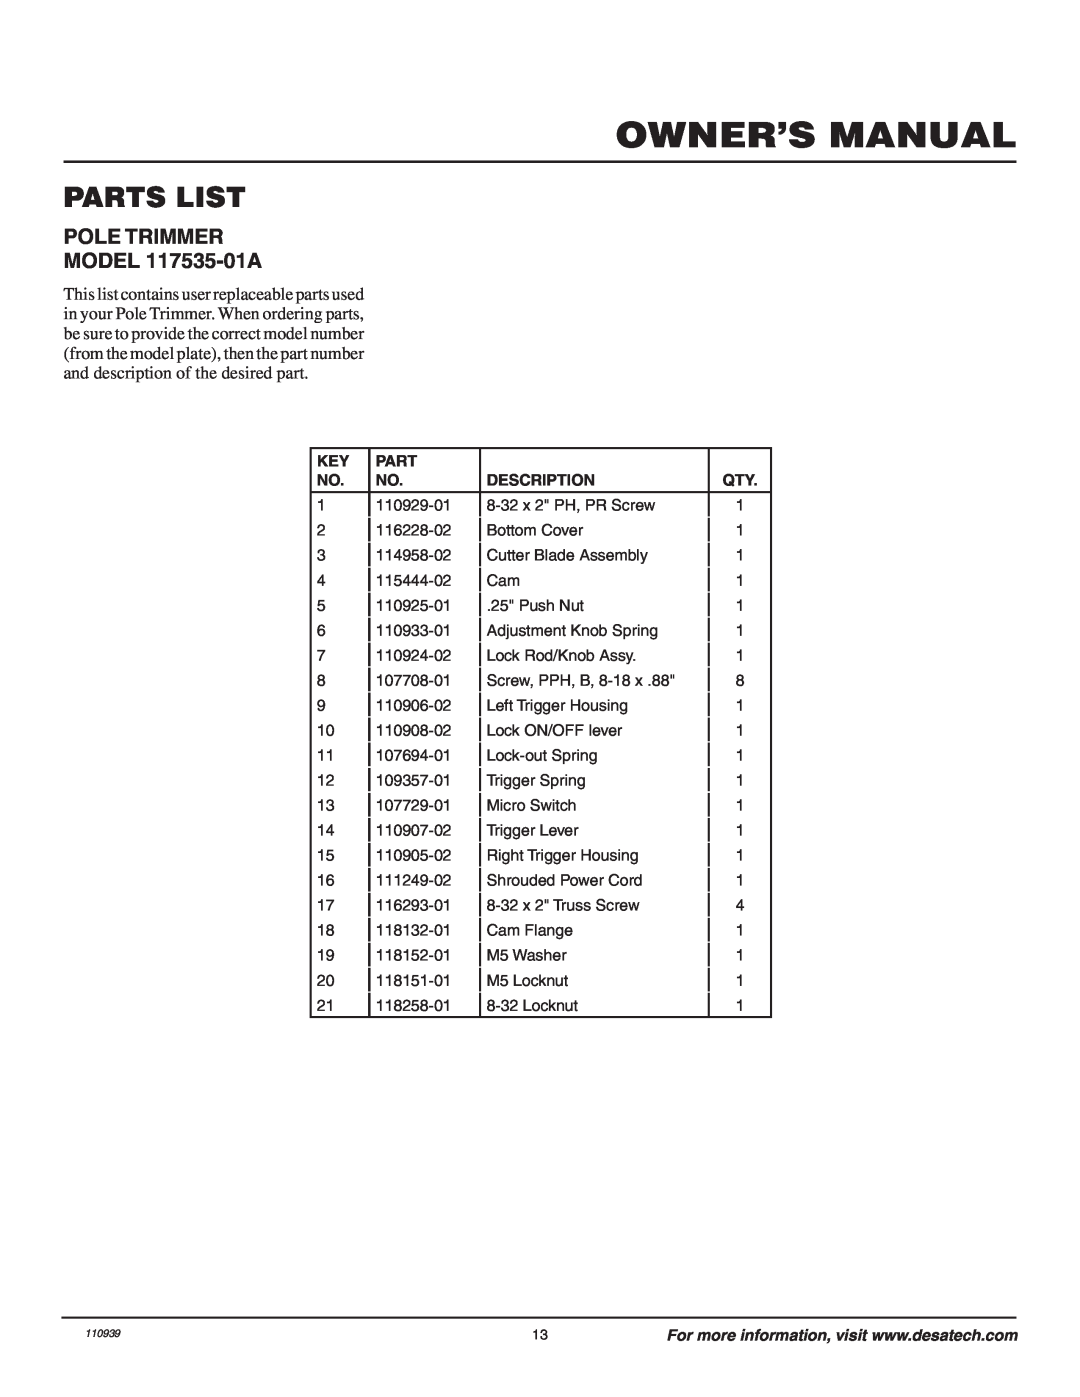 Remington Power Tools owner manual Parts List, POLE TRIMMER MODEL 117535-01A 